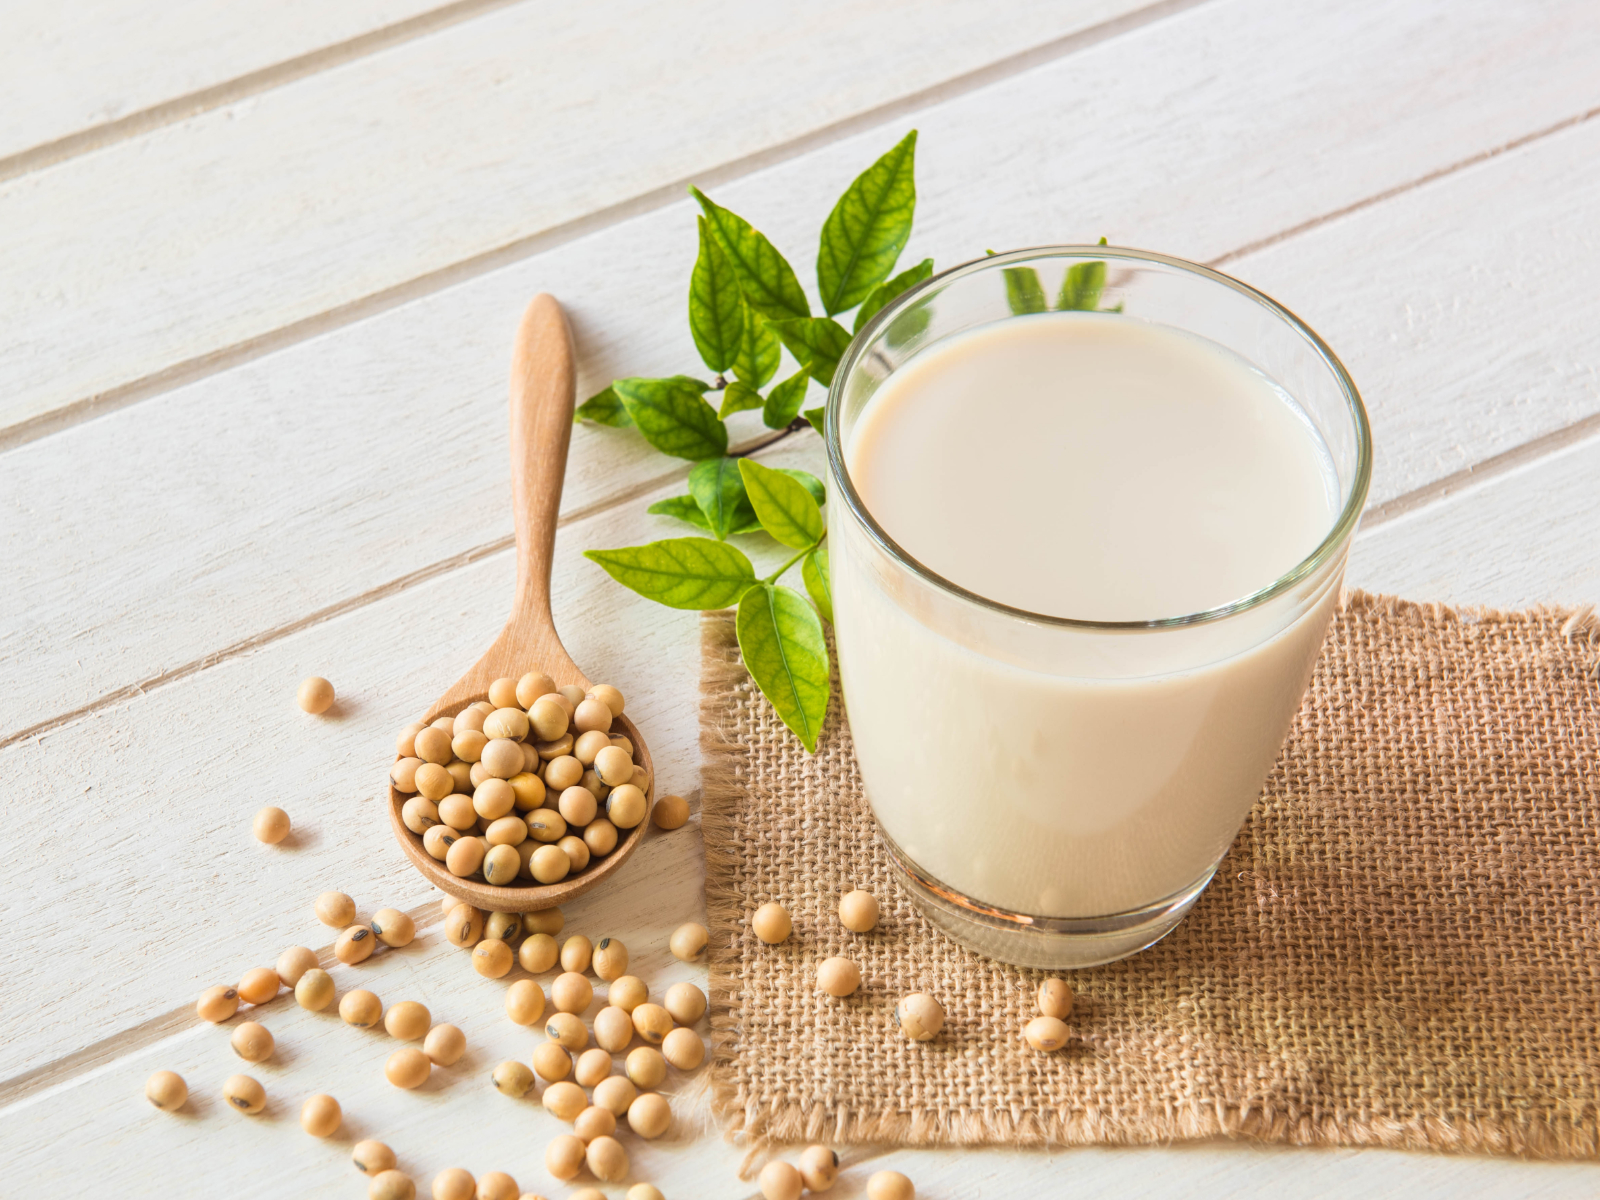 soy milk in a glass next to soy beans and a soy plant